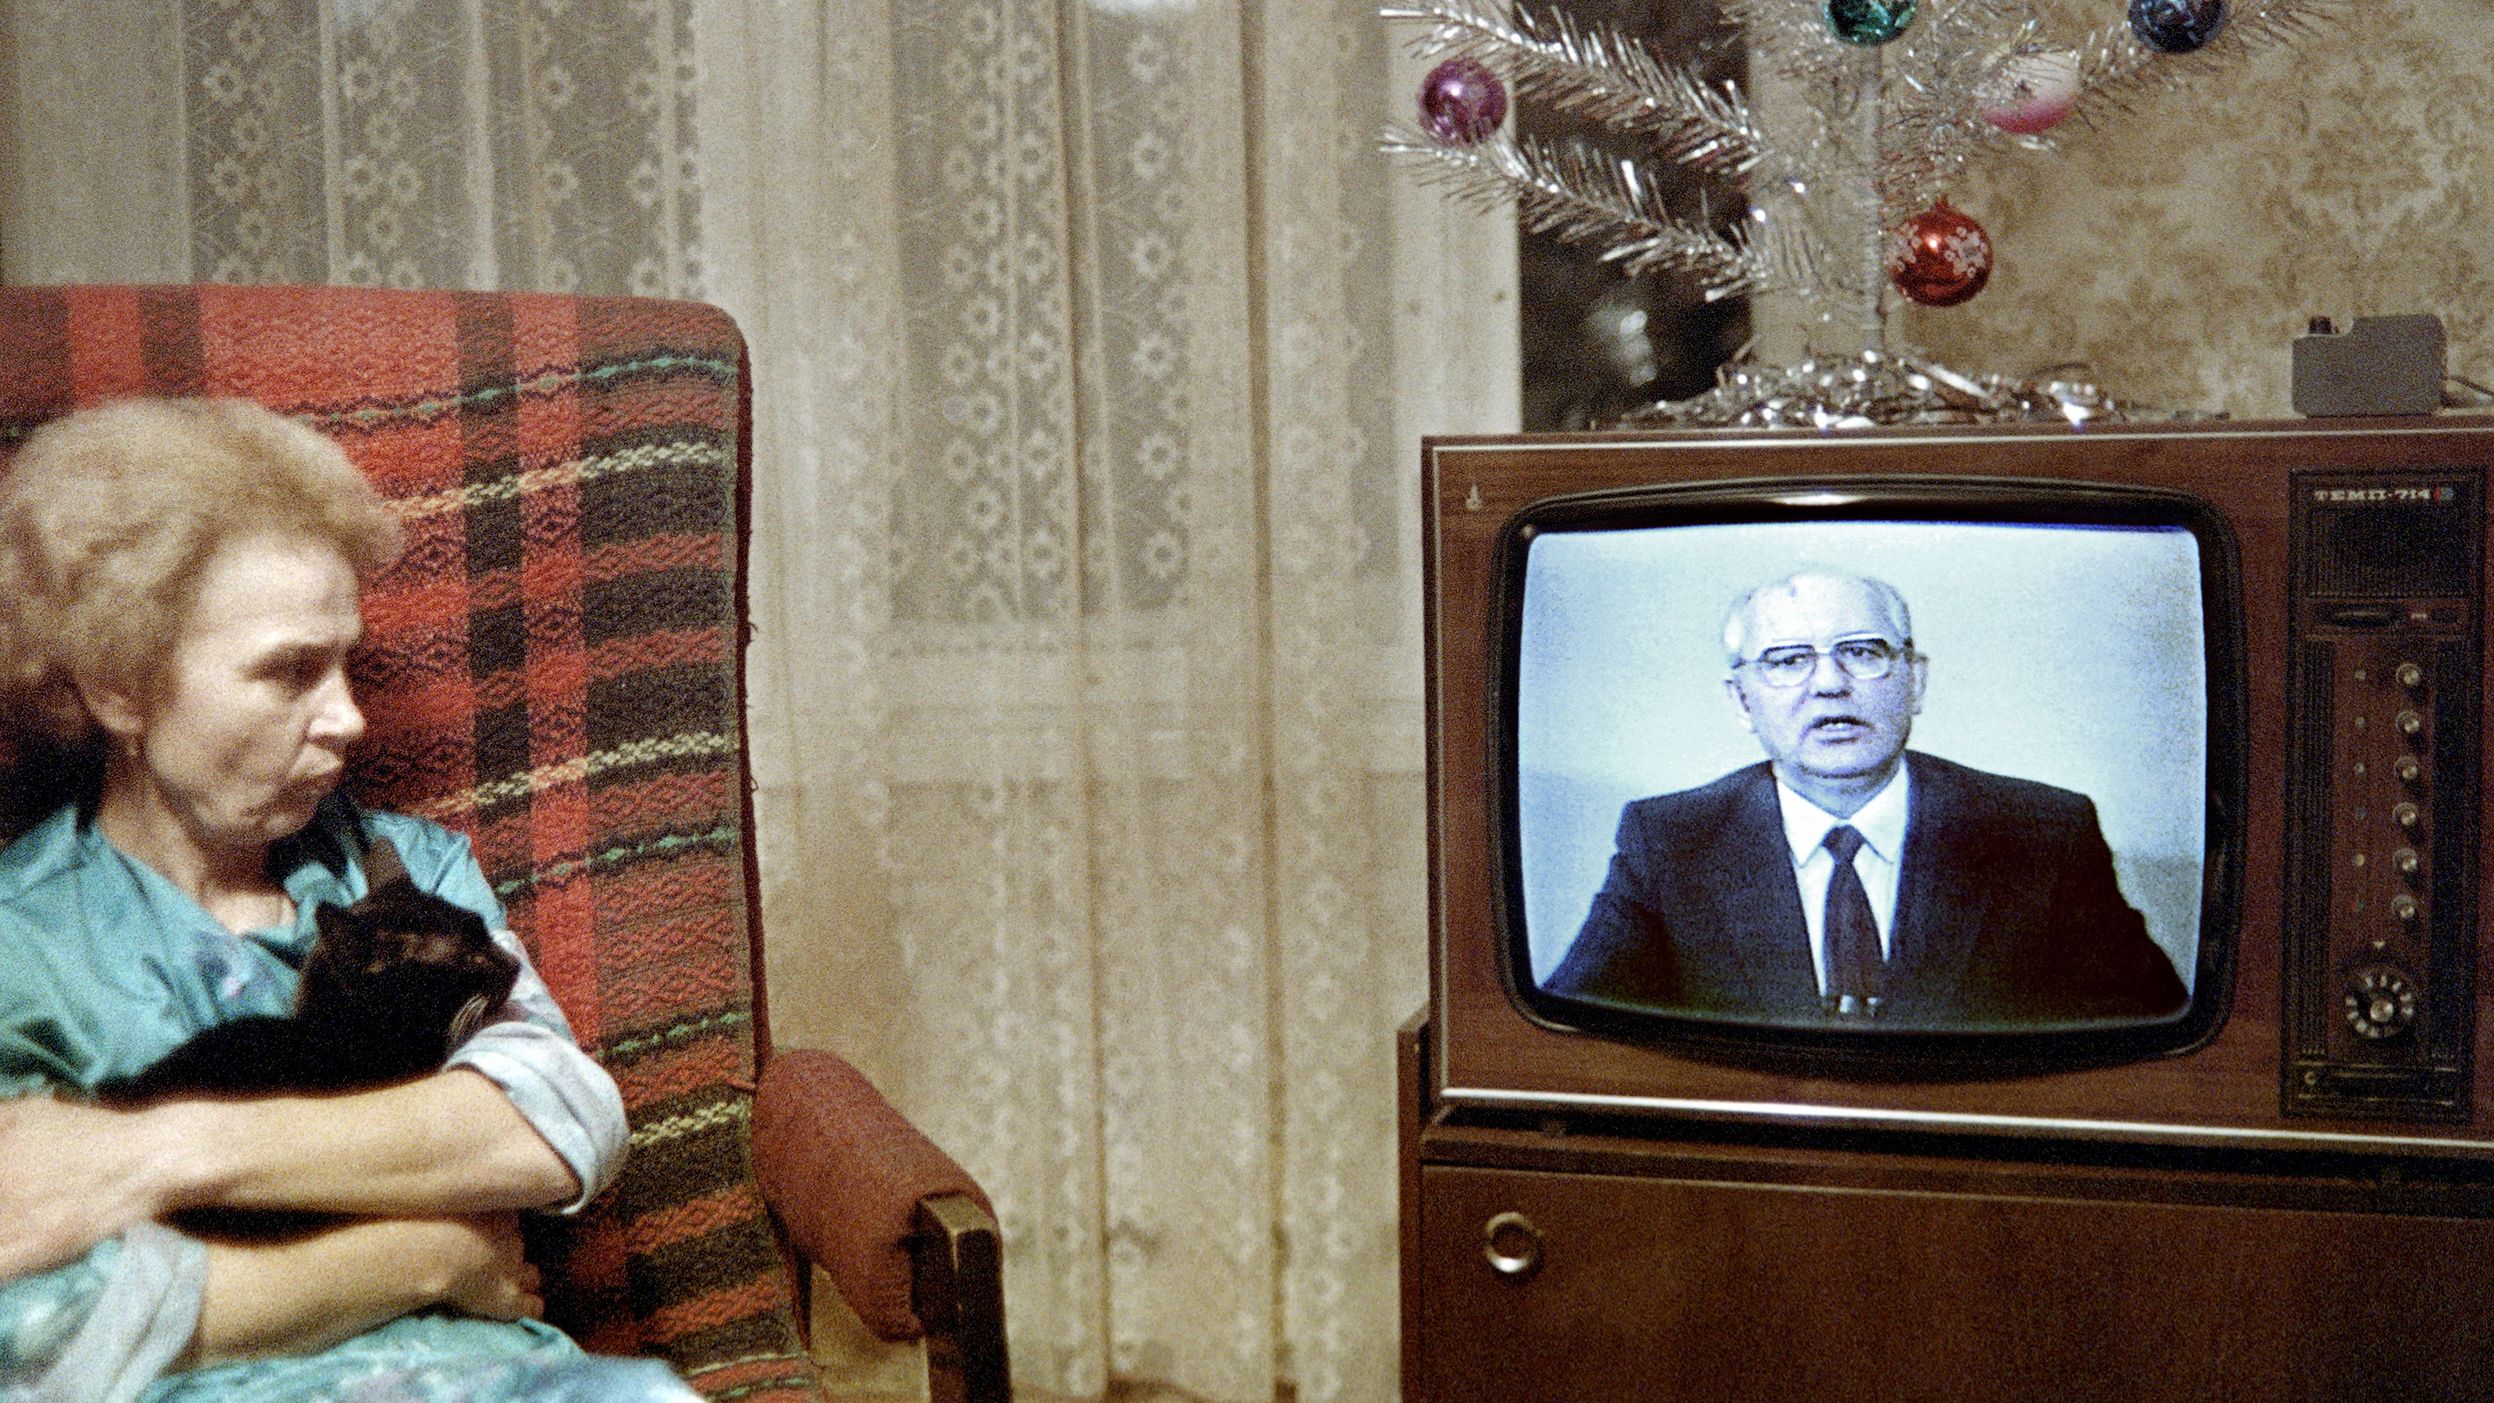 A Moscow woman and her cat watch Gorbachev's New Year message in December 1988.